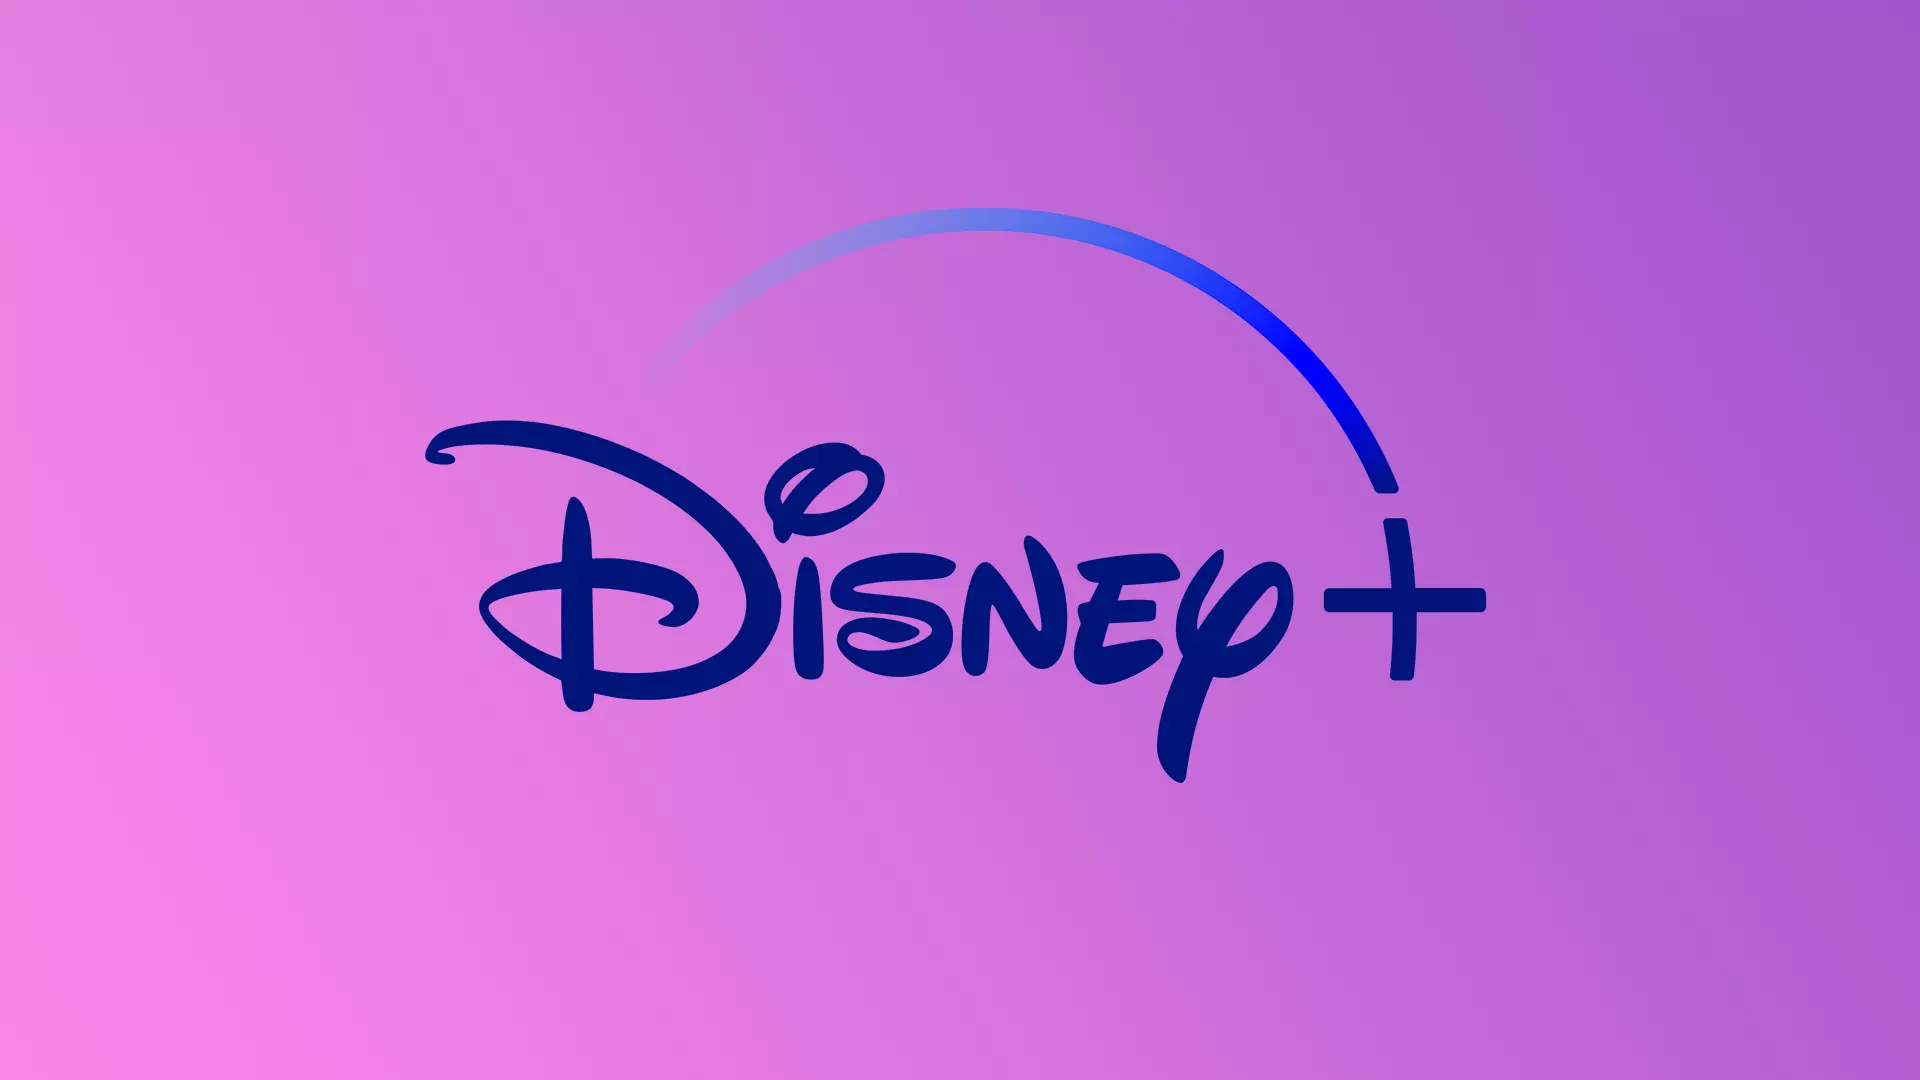 Disney+ content will be available in 4K and HDR on PS5